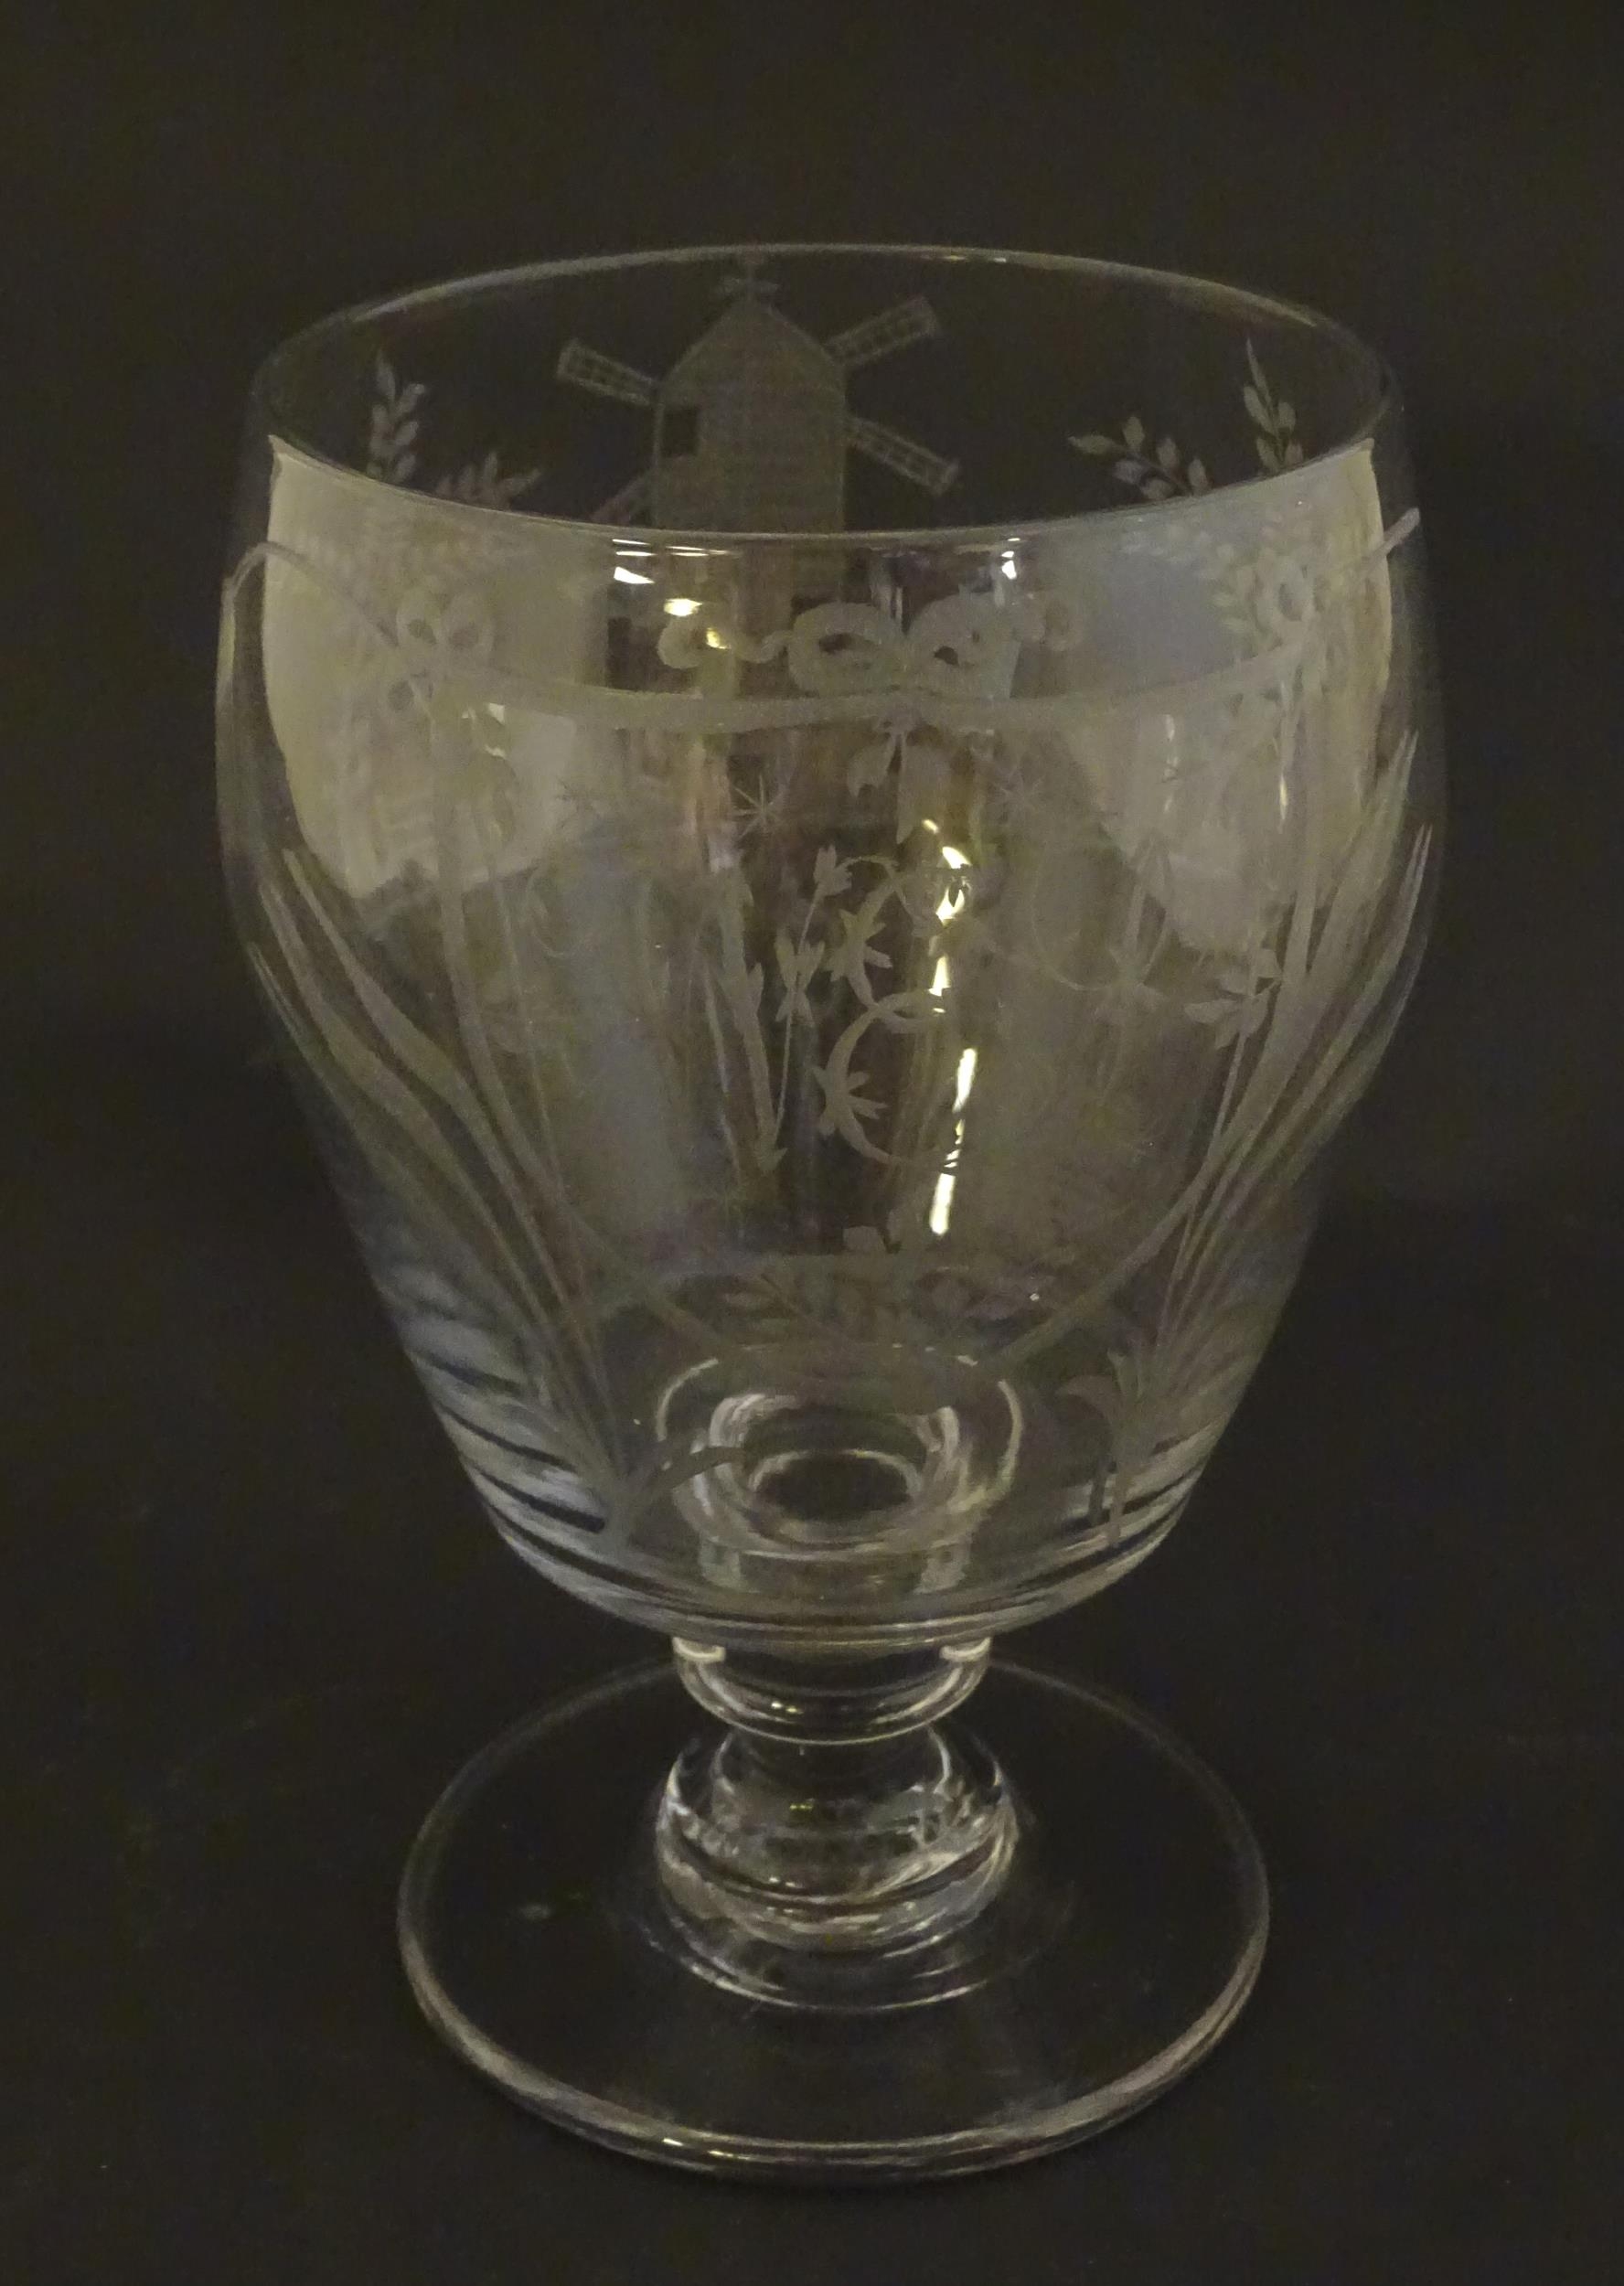 A 19thC glass rummer with engraved decoration depicting windmill and barley detail, with monogram